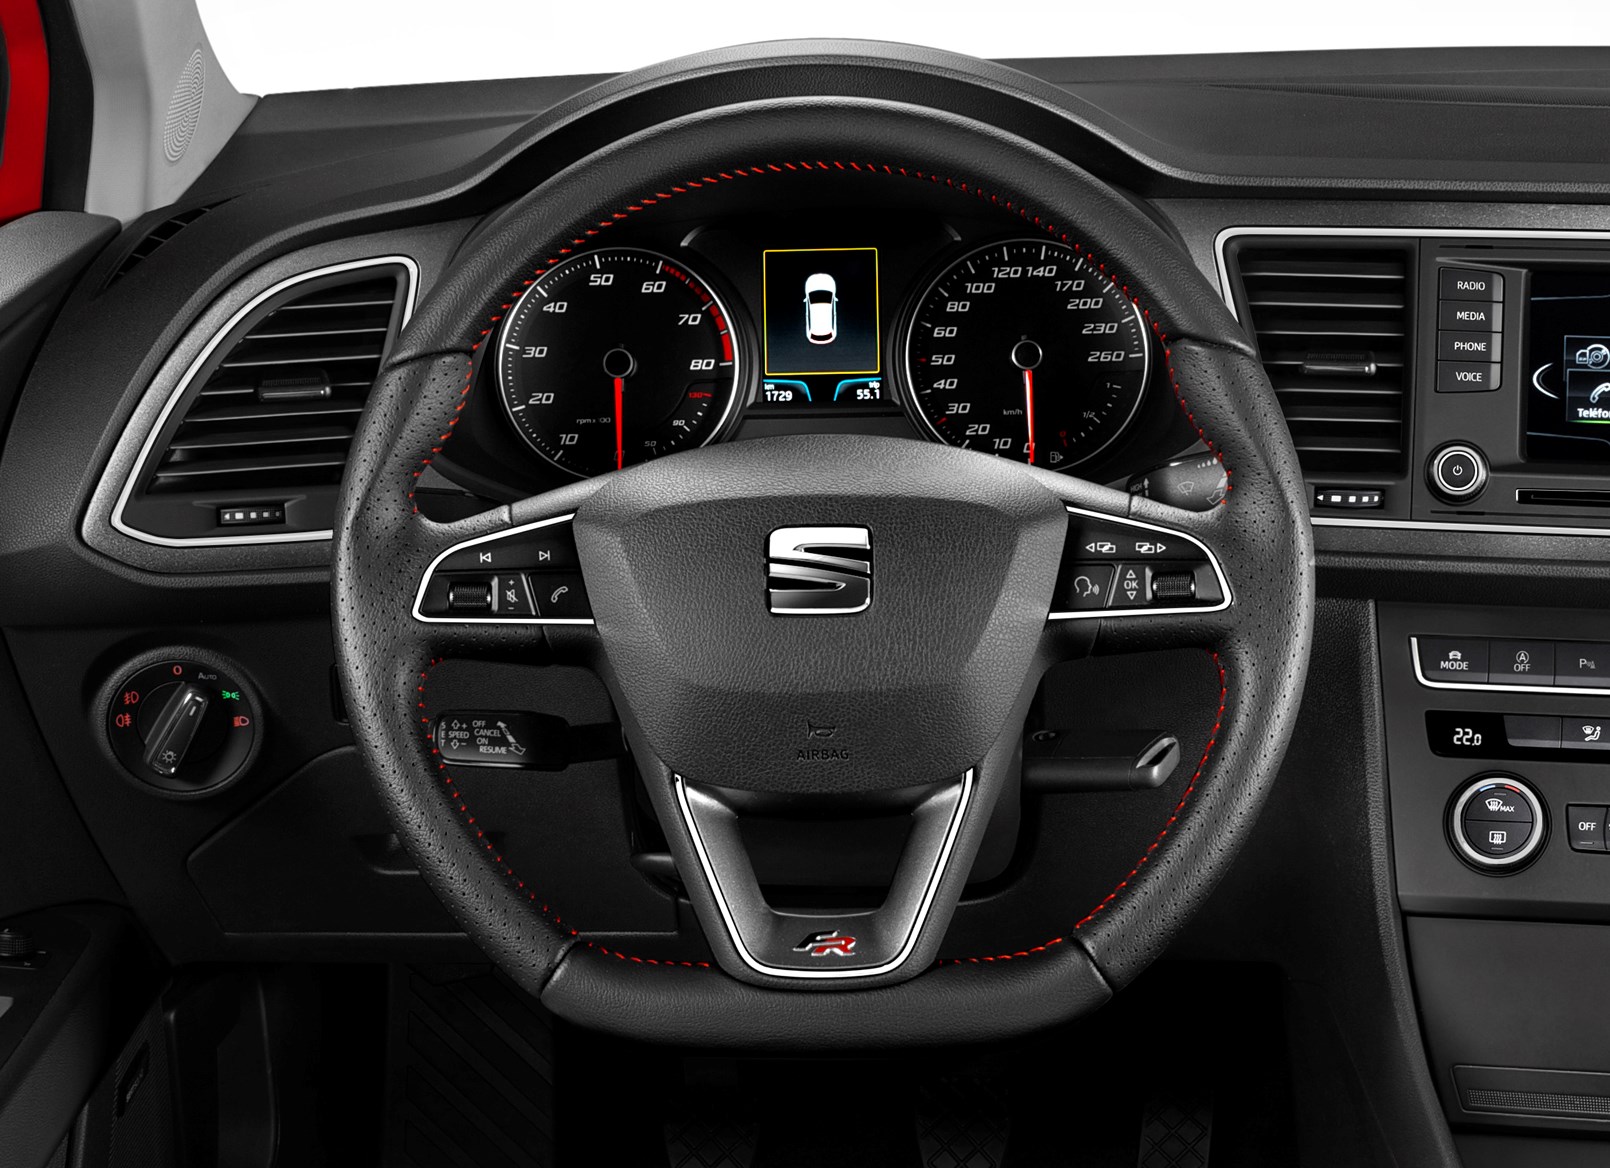 hostage Controversy scientist Used SEAT Leon SC (2013 - 2018) interior, tech and comfort | Parkers